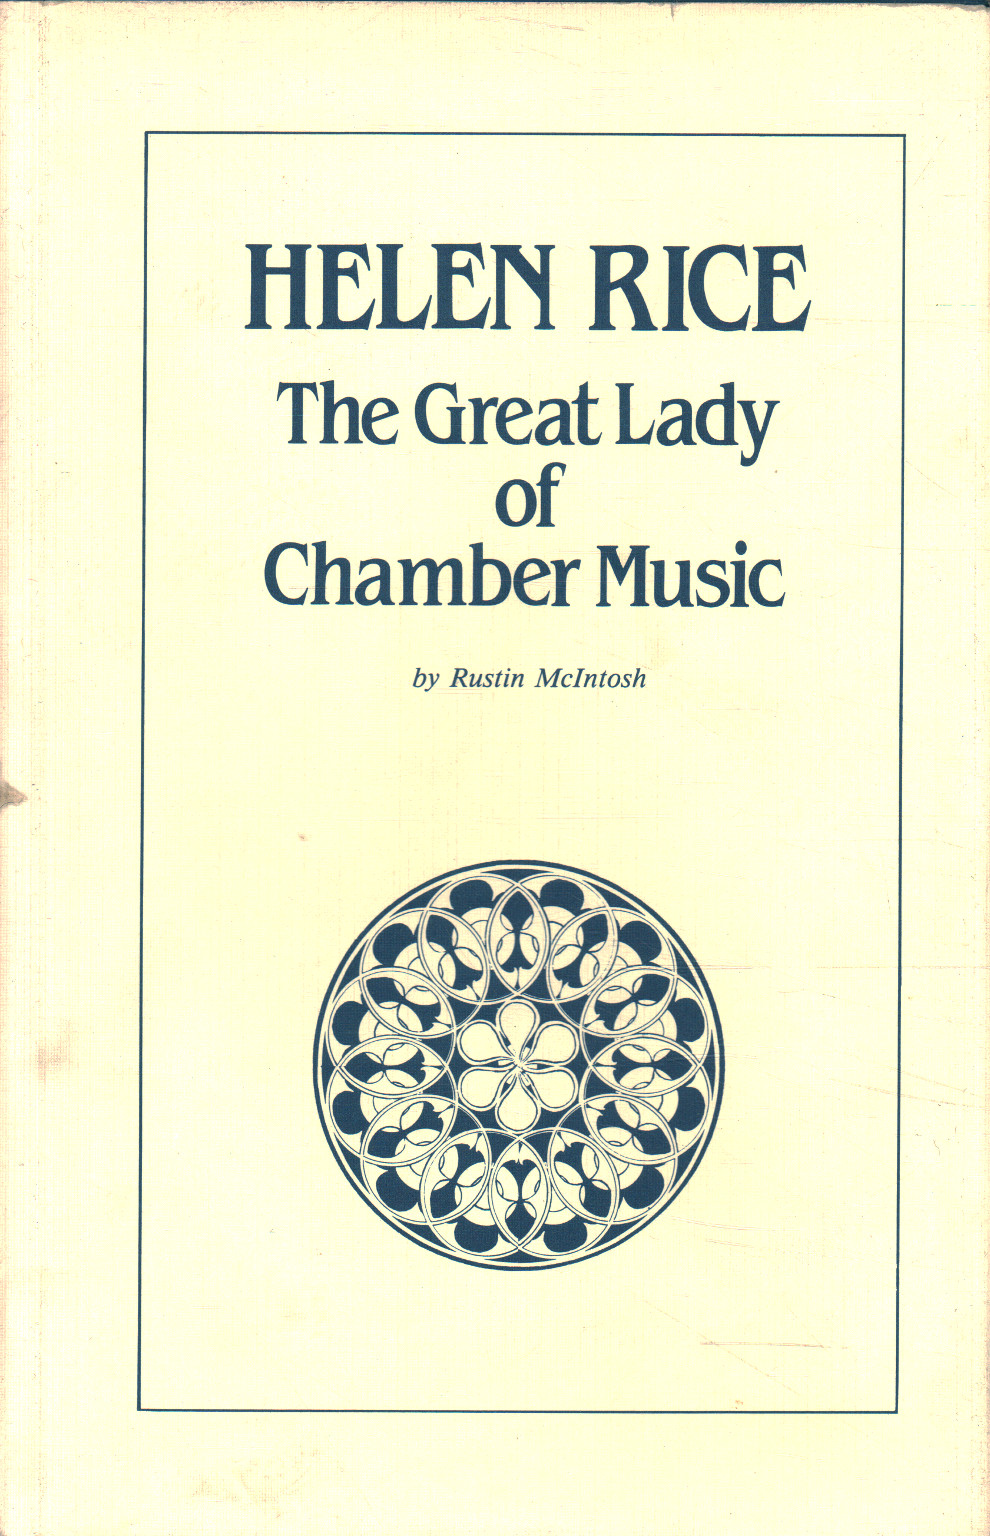 Helen Rice. The Great Lady of Chamber Music, Rustin McIntosh